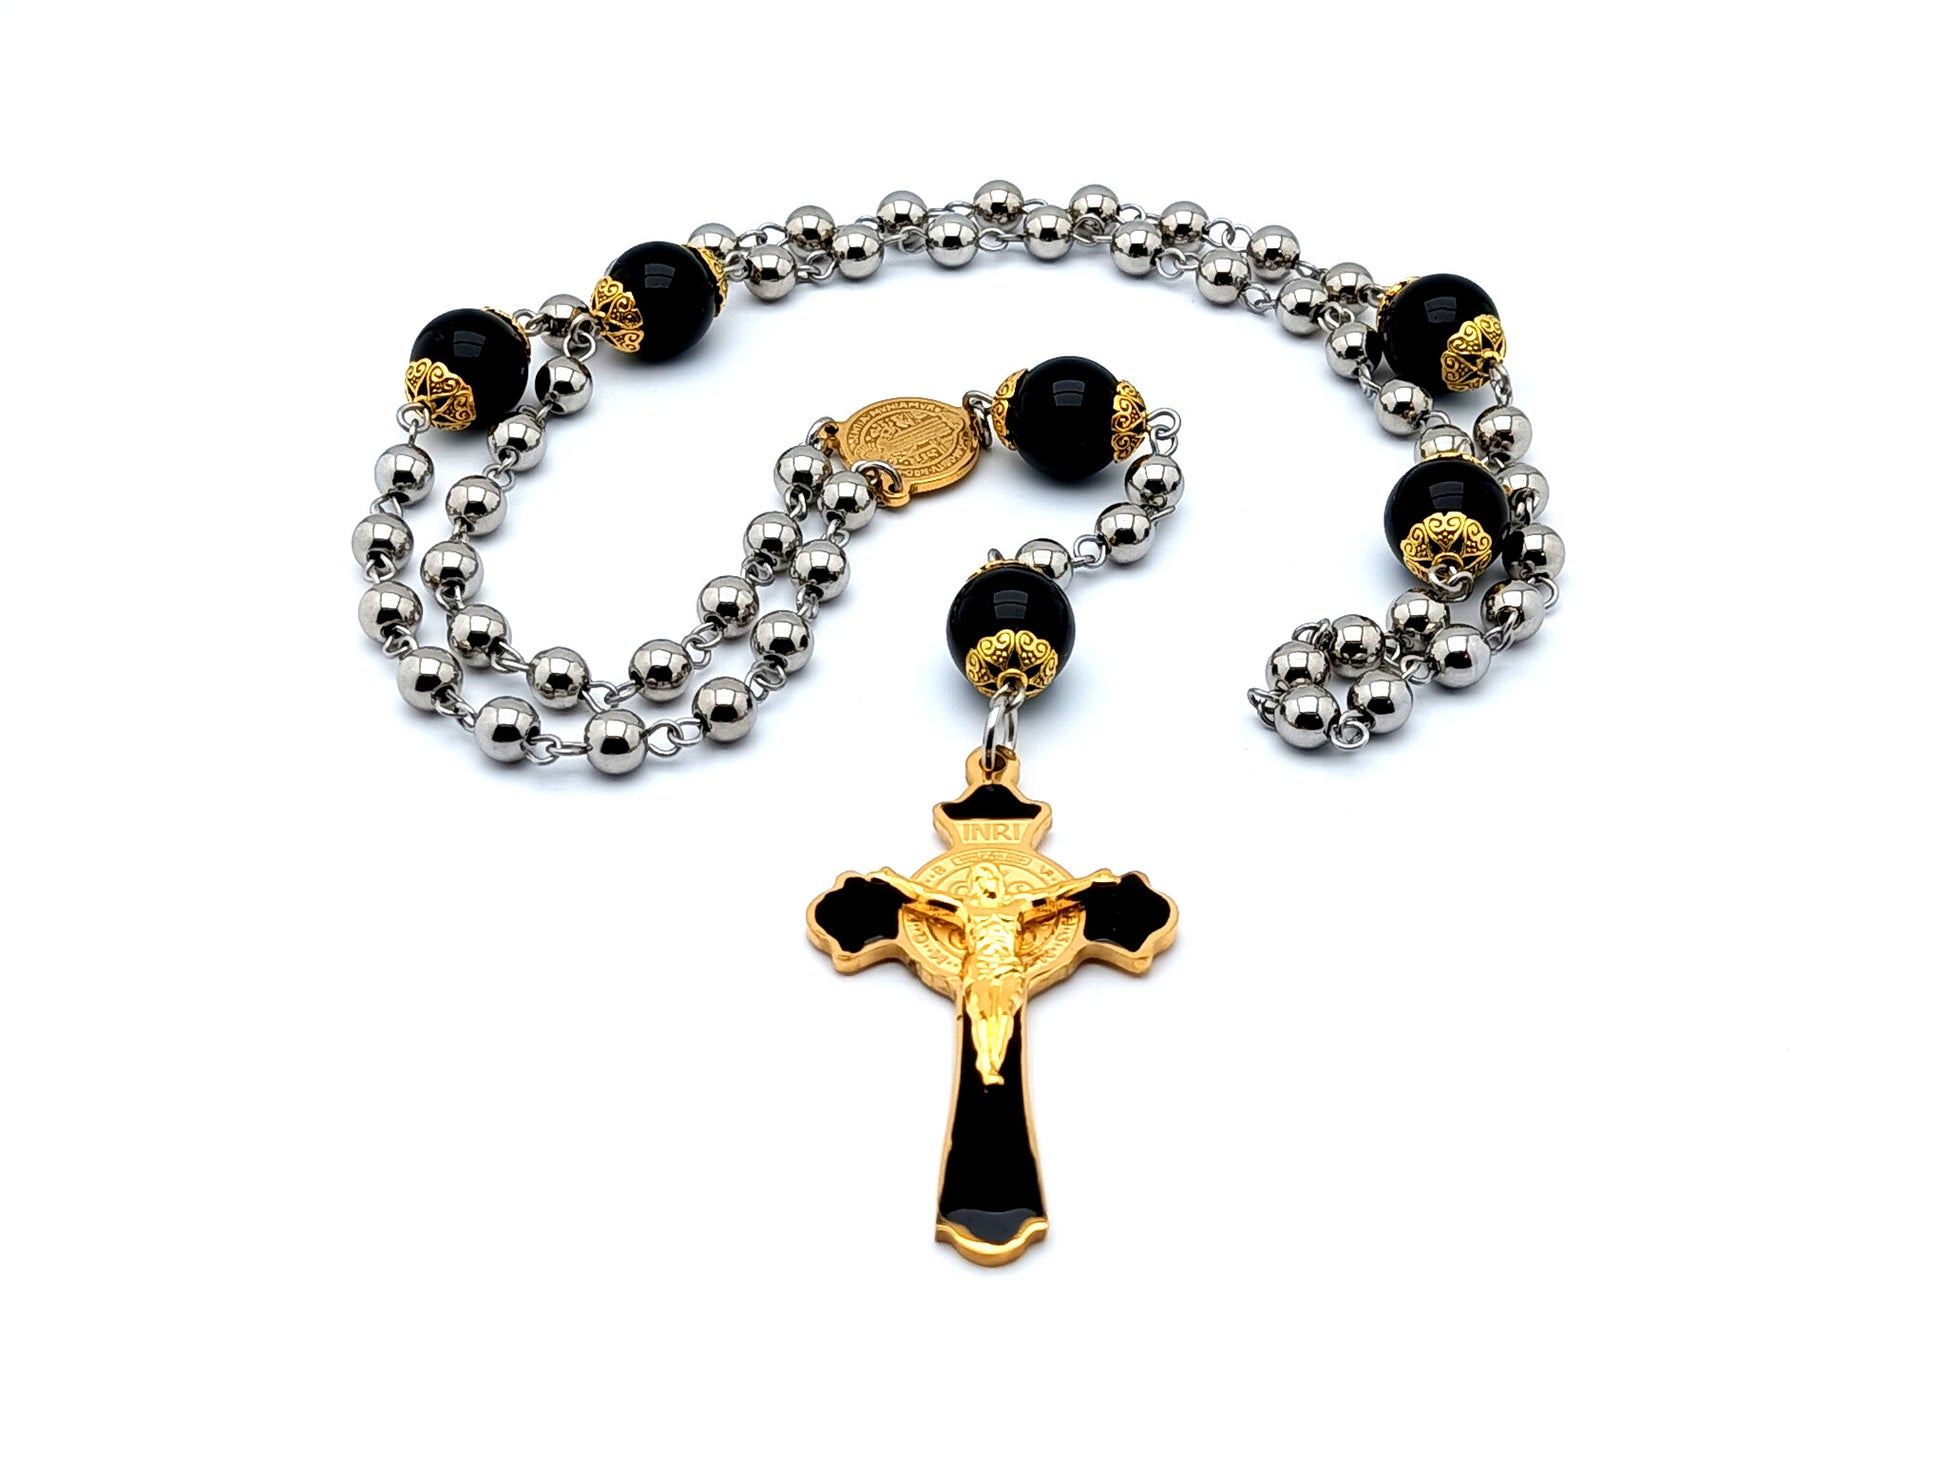 Saint Benedict unique rosary beads with stainless steel and onyx gemstone beads and enamel and gold Saint Benedict crucifix.